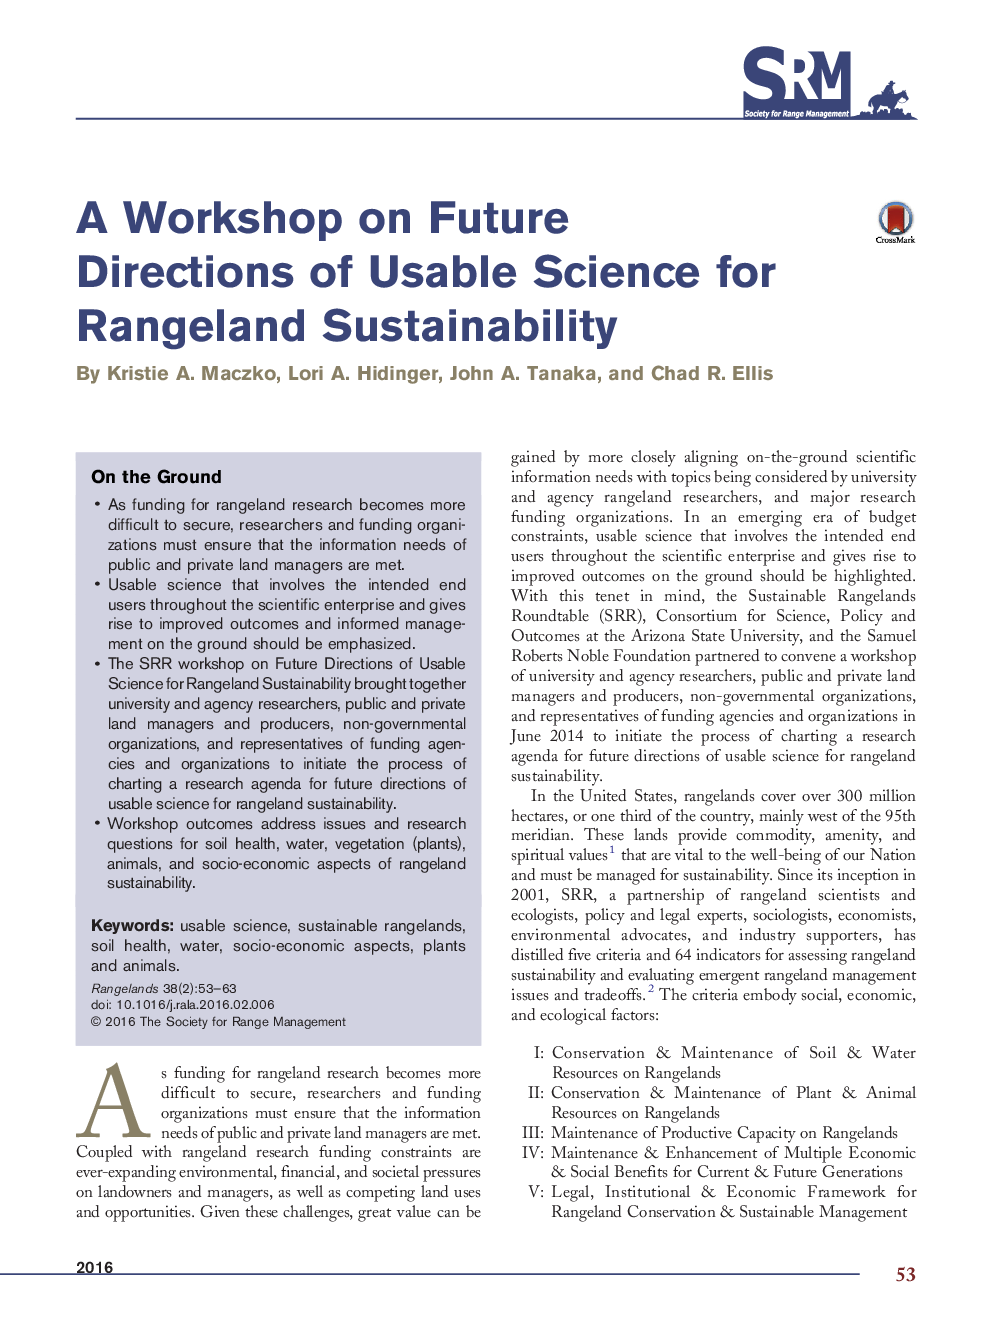 A Workshop on Future Directions of Usable Science for Rangeland Sustainability